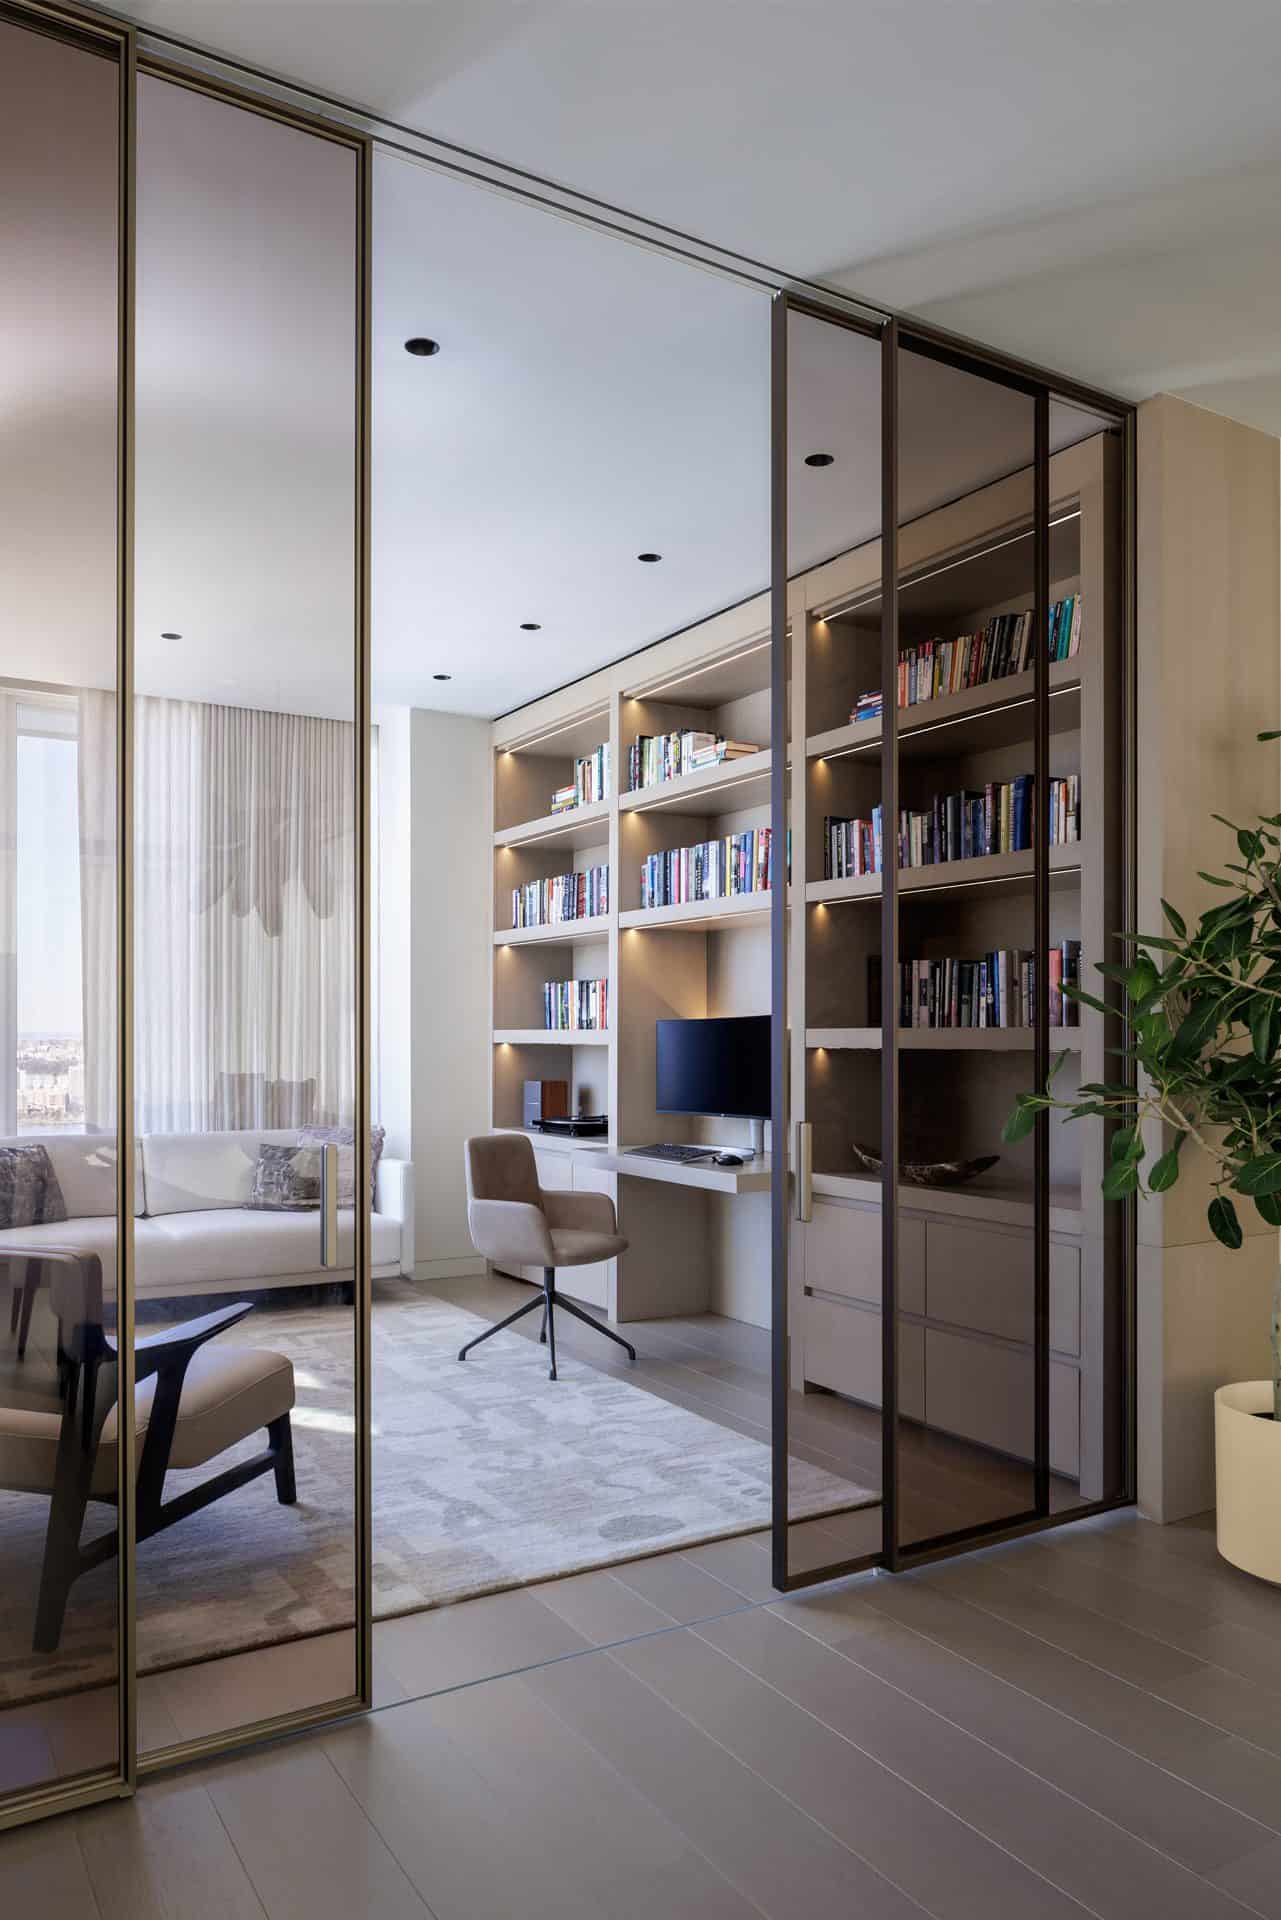 View looking through sliding glass doors of a study with book shelves and desk area with Bilotta millwork , chairs, couch and tables.